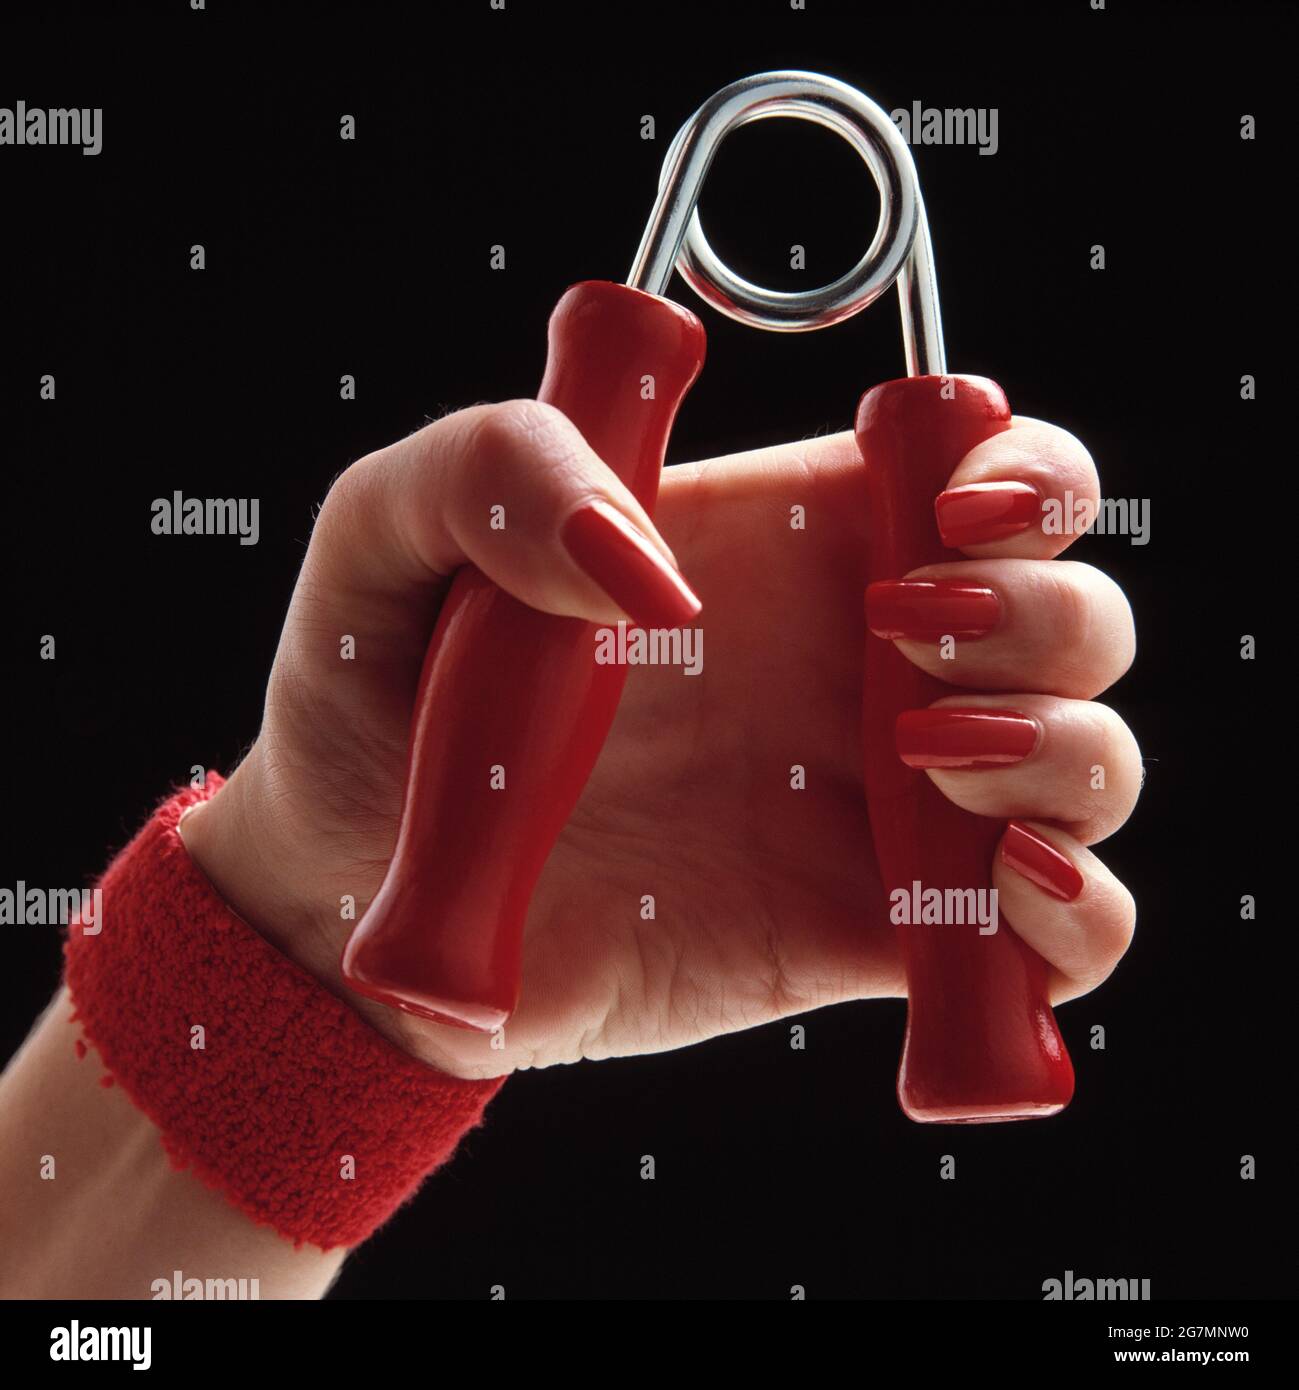 Young woman. Close up of hand using grip exerciser. Stock Photo